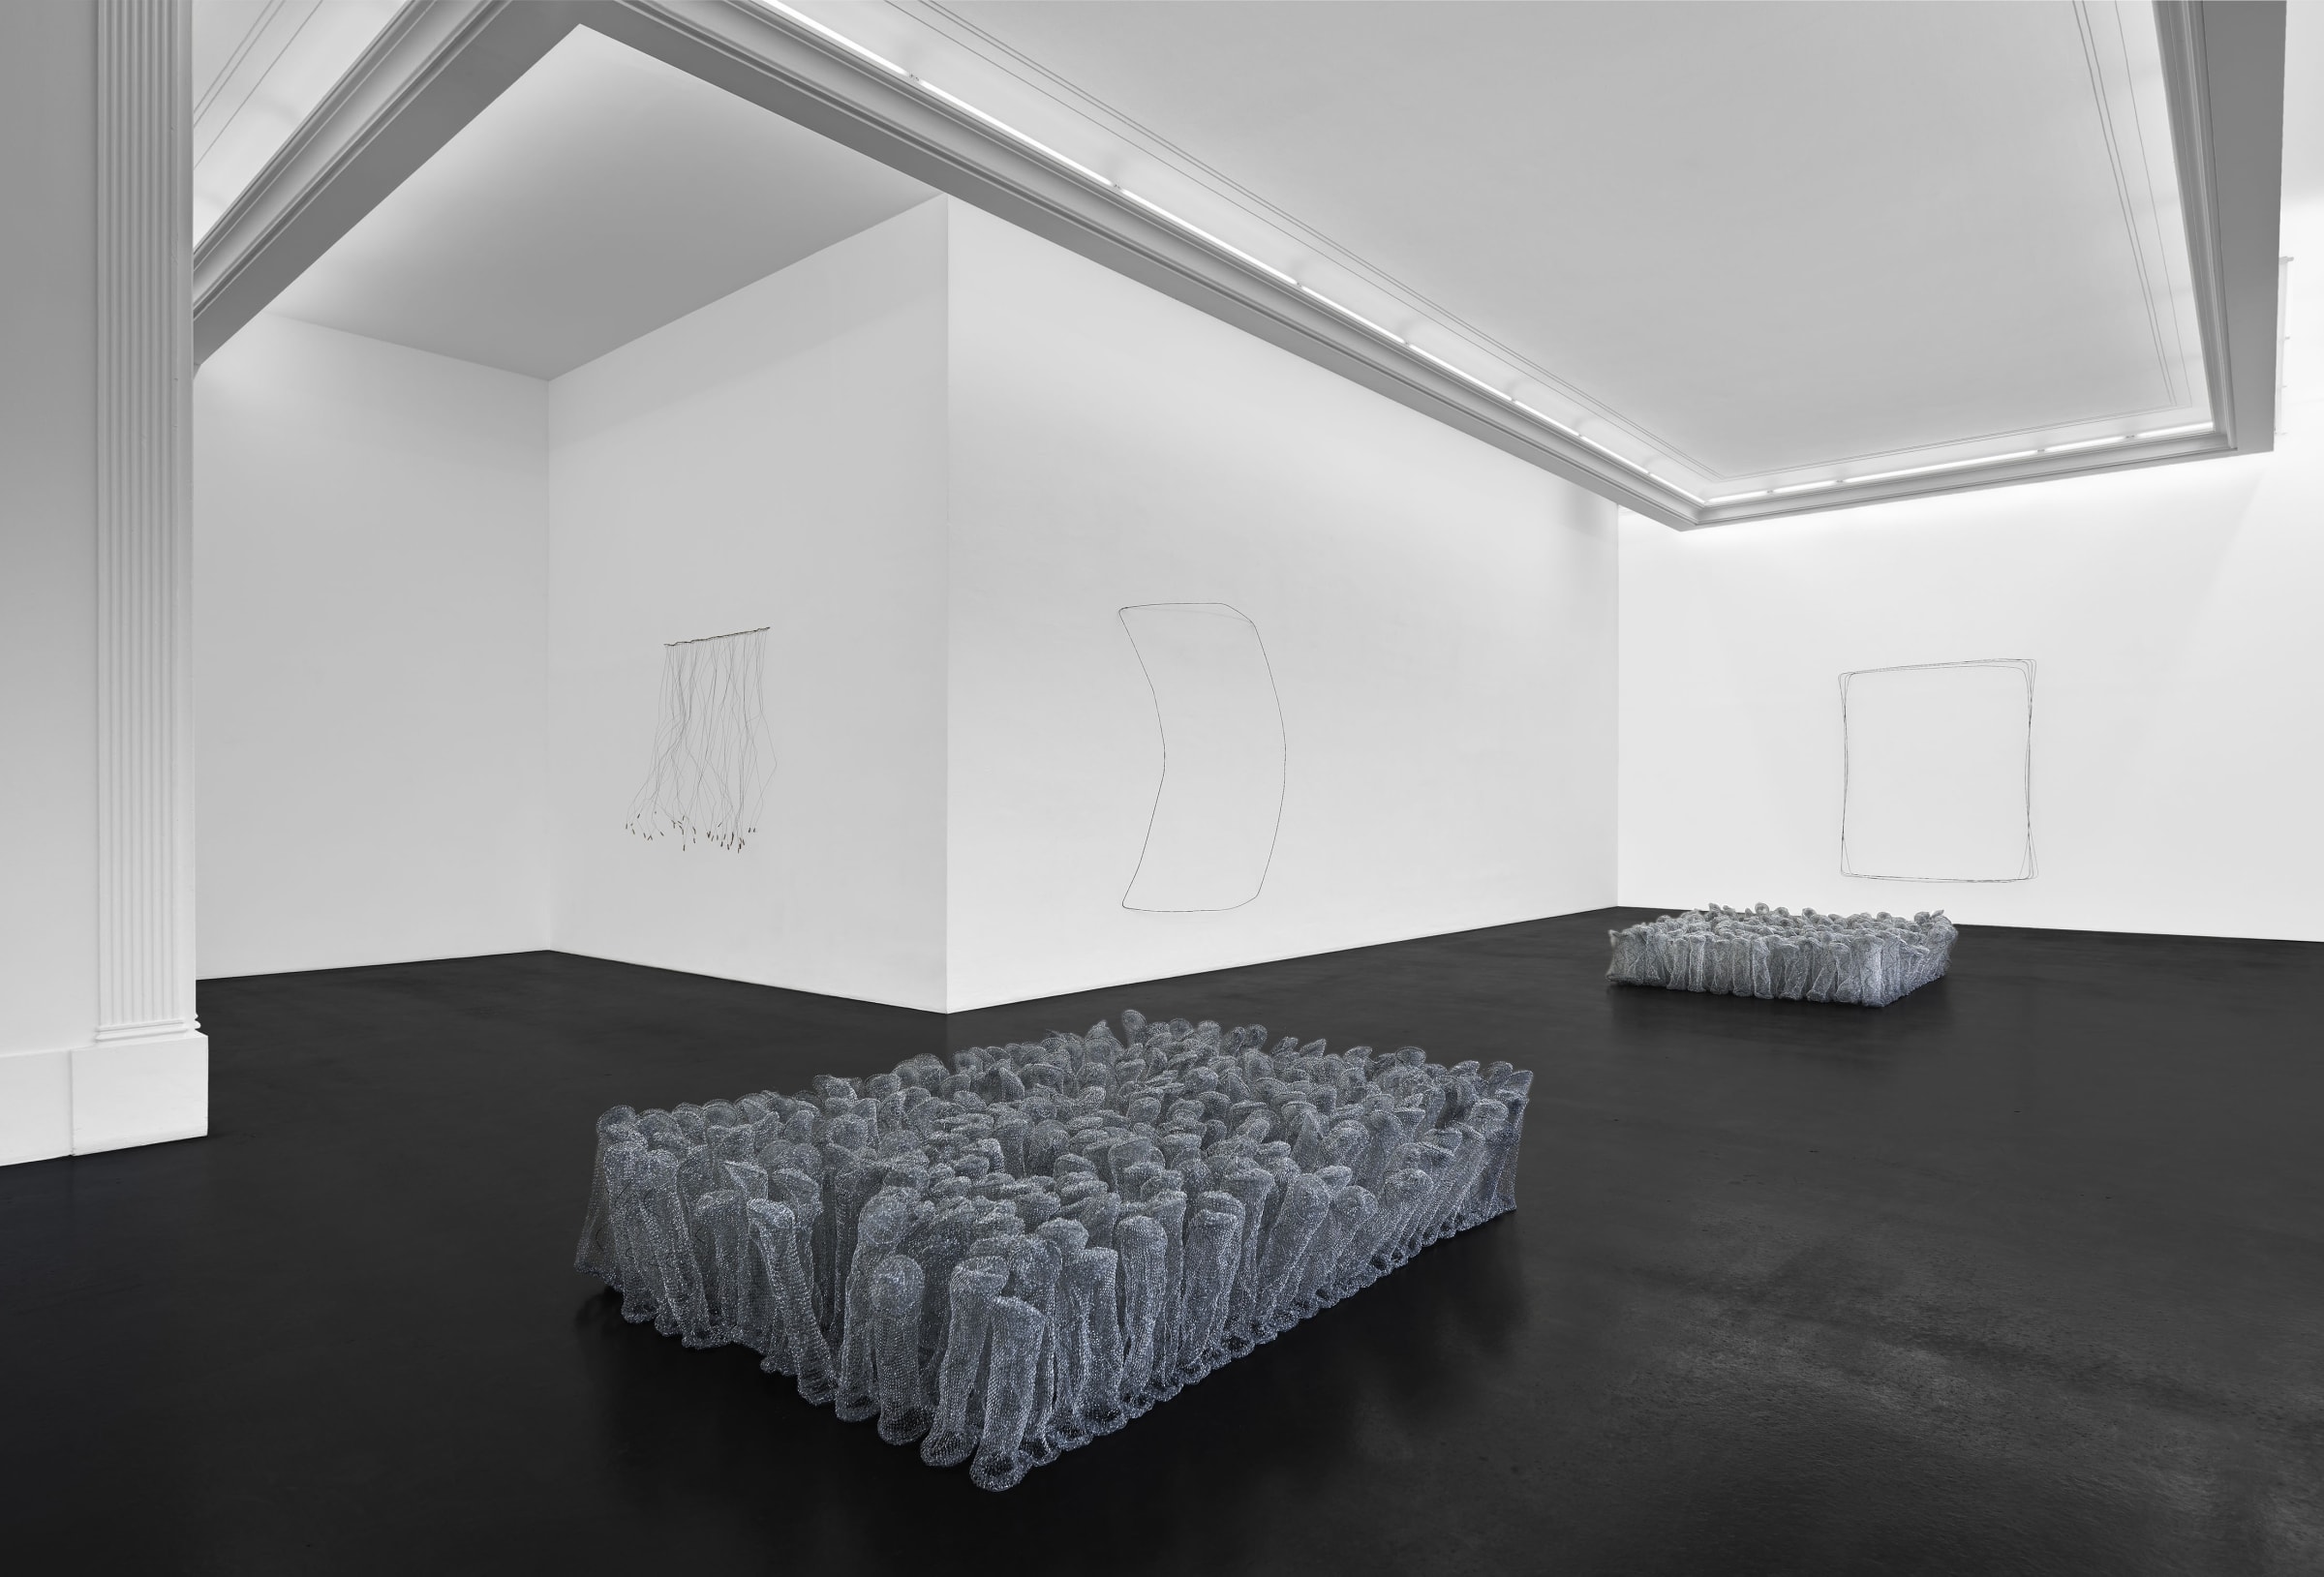 Bronwyn Katz Salvaged Letter Installation View November 15, 2019 – January 10, 2020 Peres Projects, Berlin Photographed by: Matthias Kolb